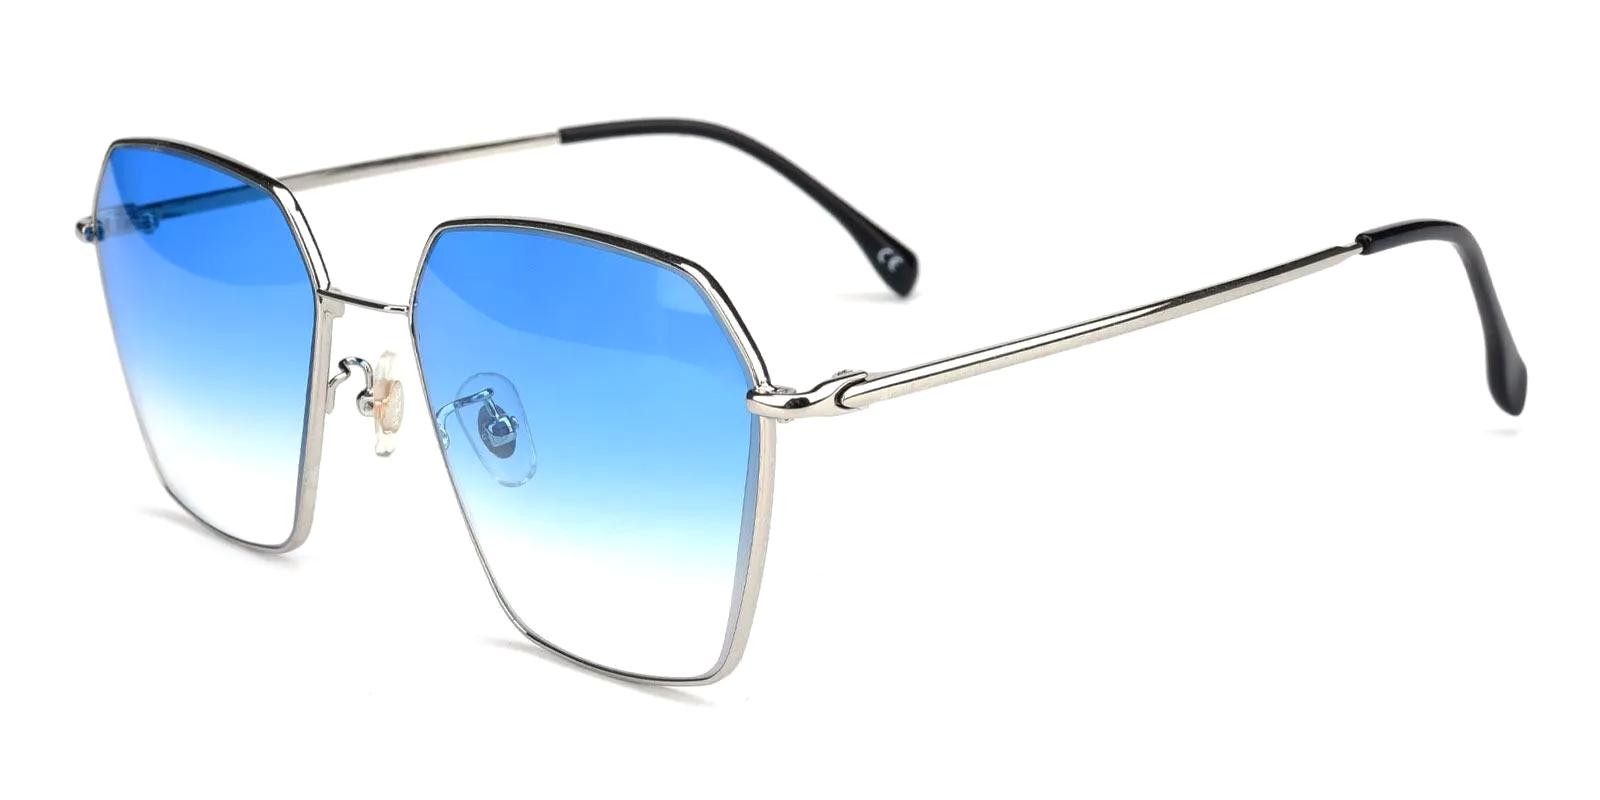 Labi Silver Metal Sunglasses , NosePads Frames from ABBE Glasses